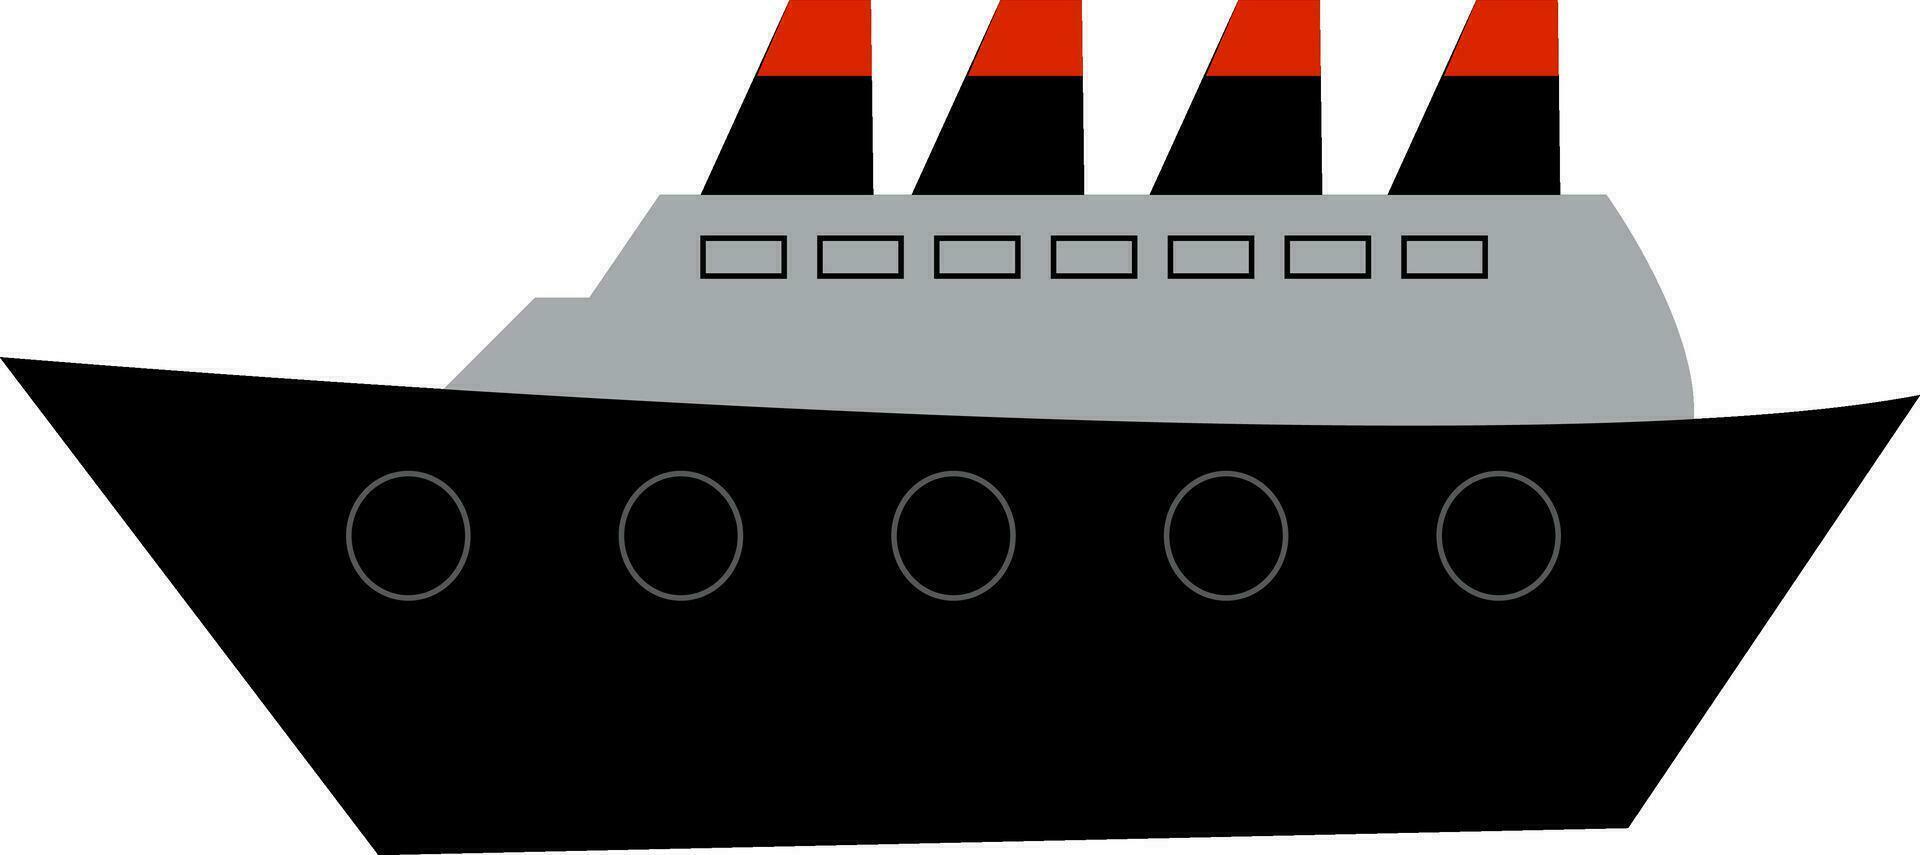 Titanic ship on is maiden voyage vector or color illustration